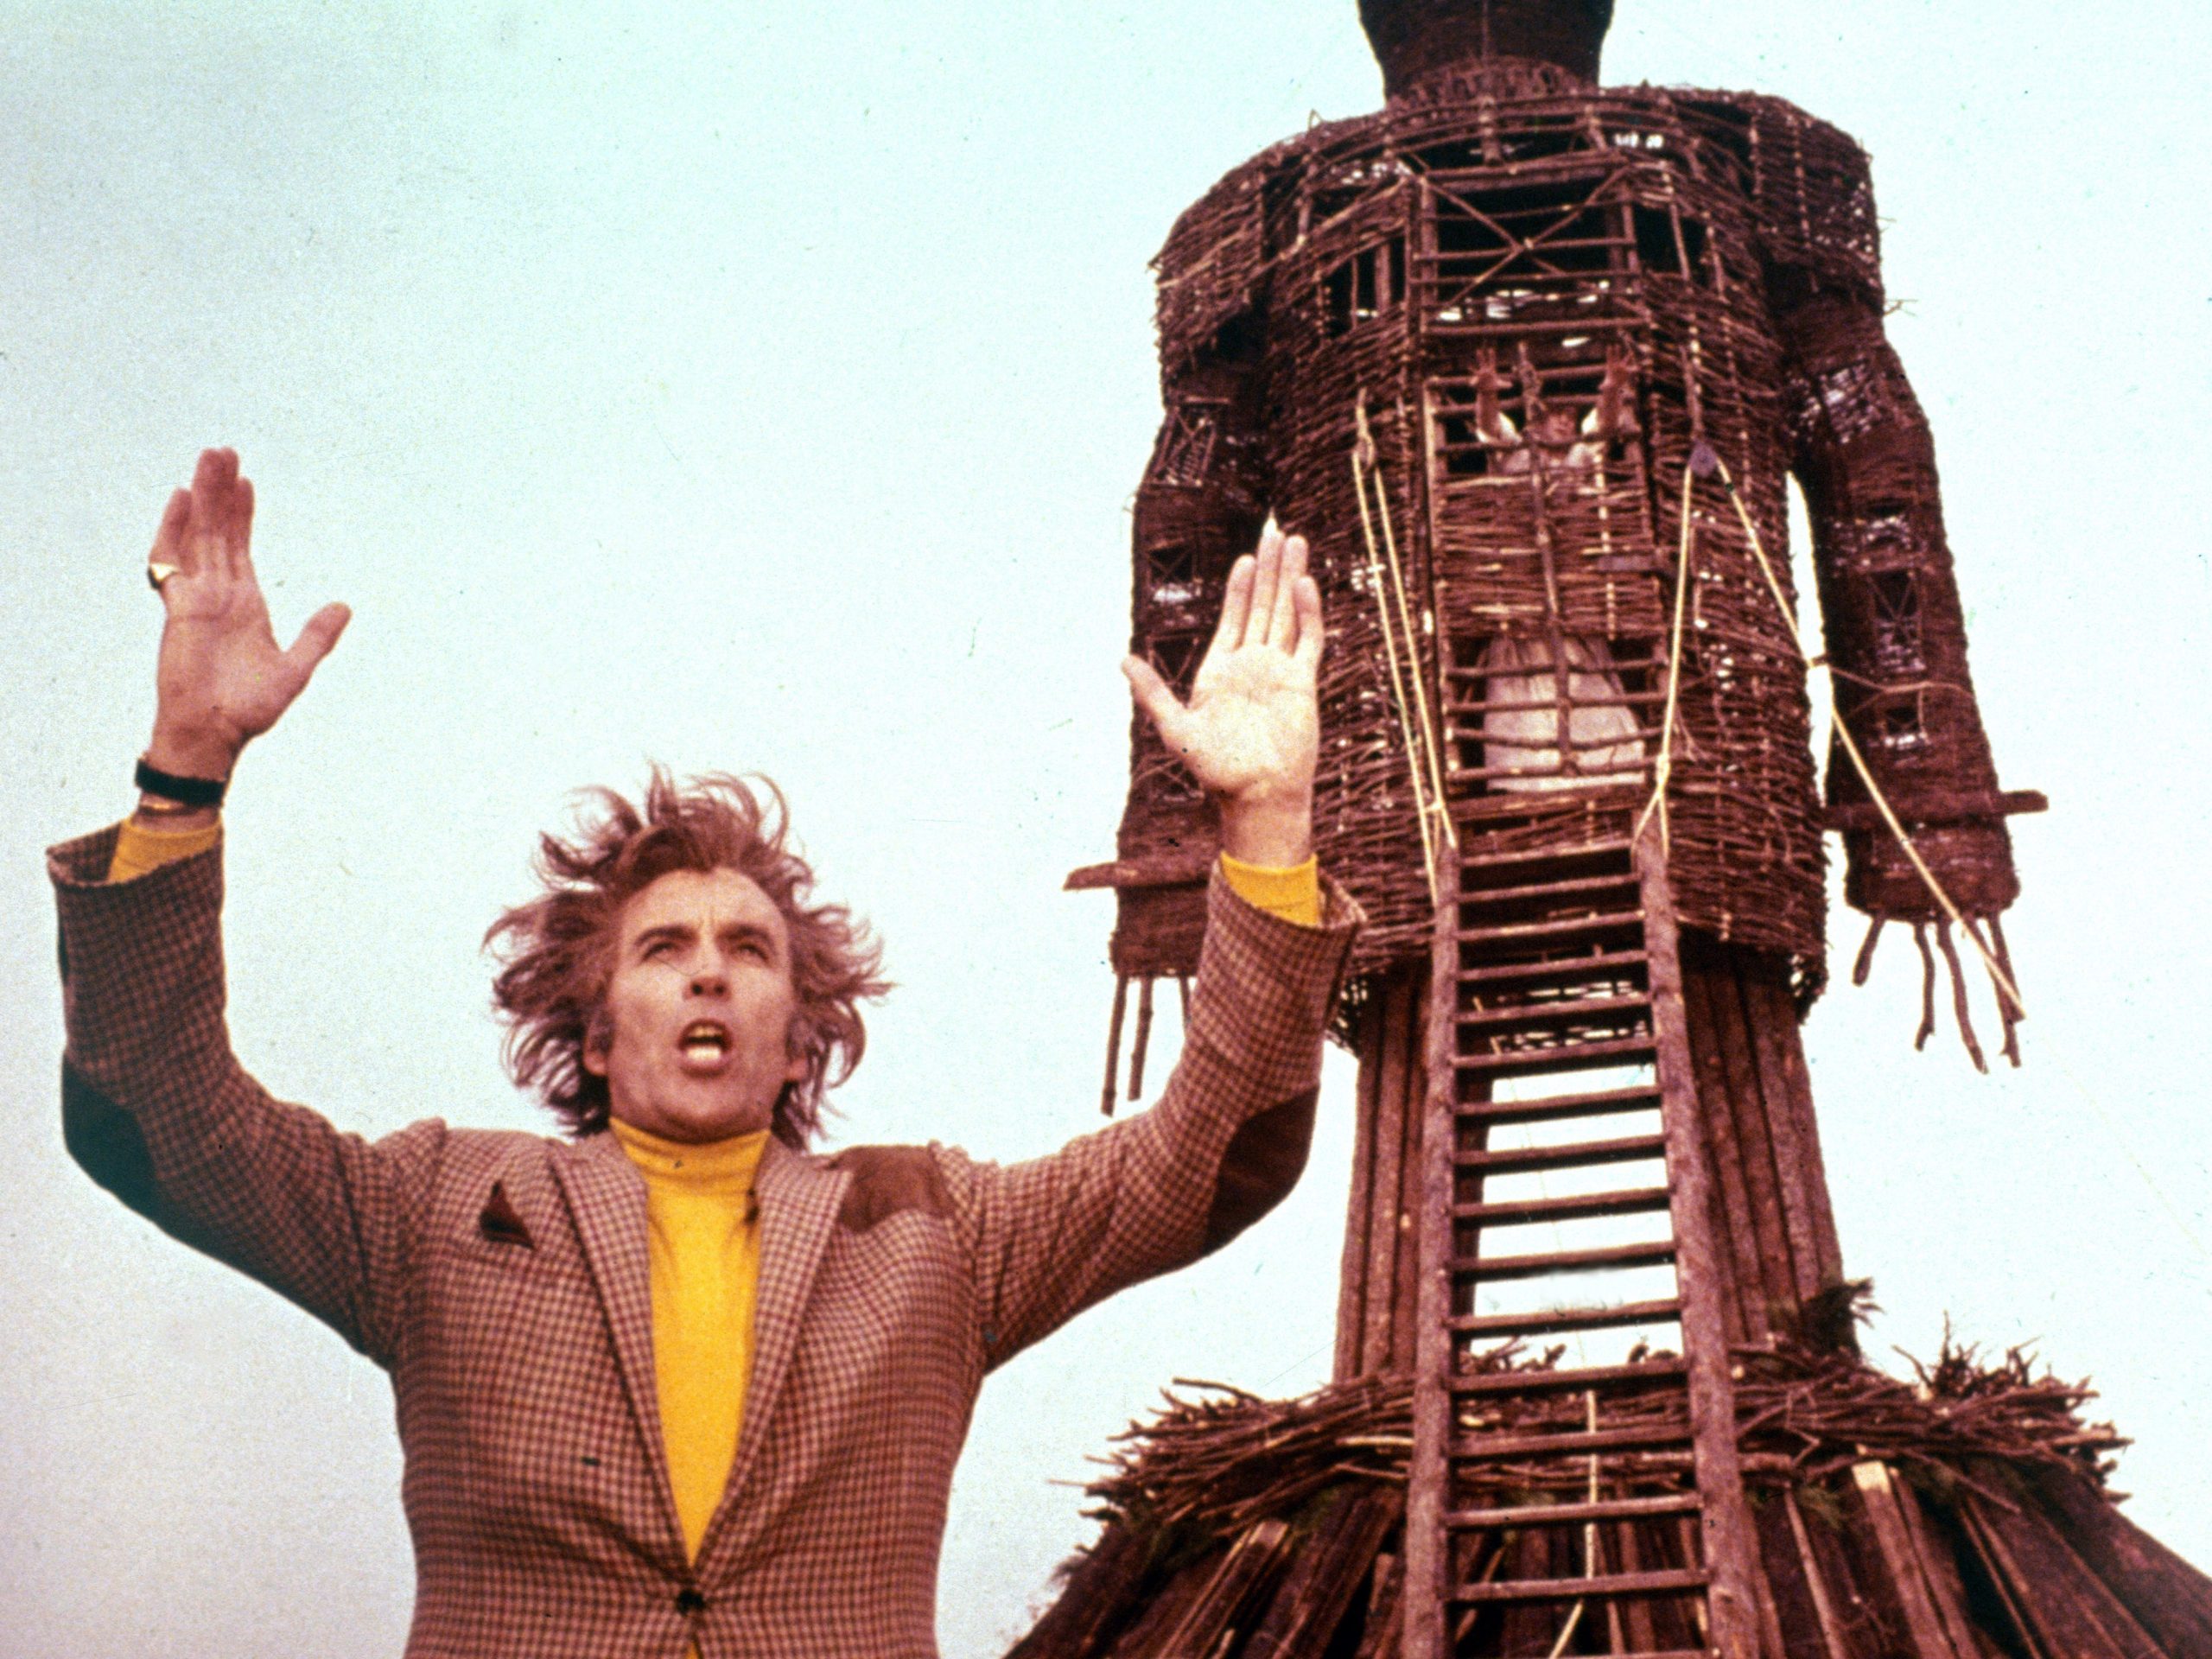 A scene from the Wicker Man, with the actor standing in front of a large wicker statue